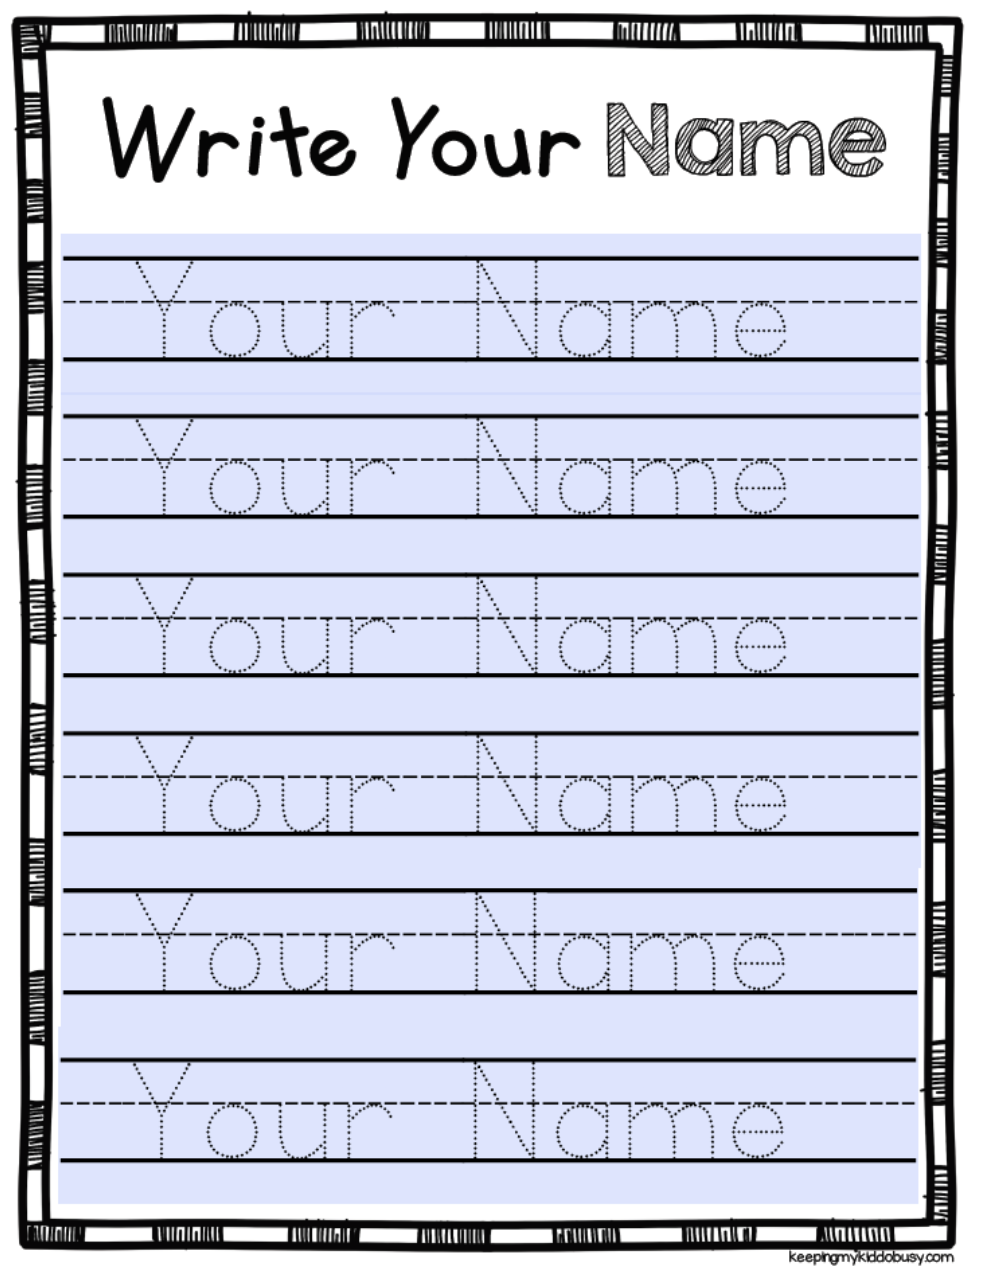 Free Editable Name Tracing Activity - Type Student Names And intended for Name Tracing Editable Sheets